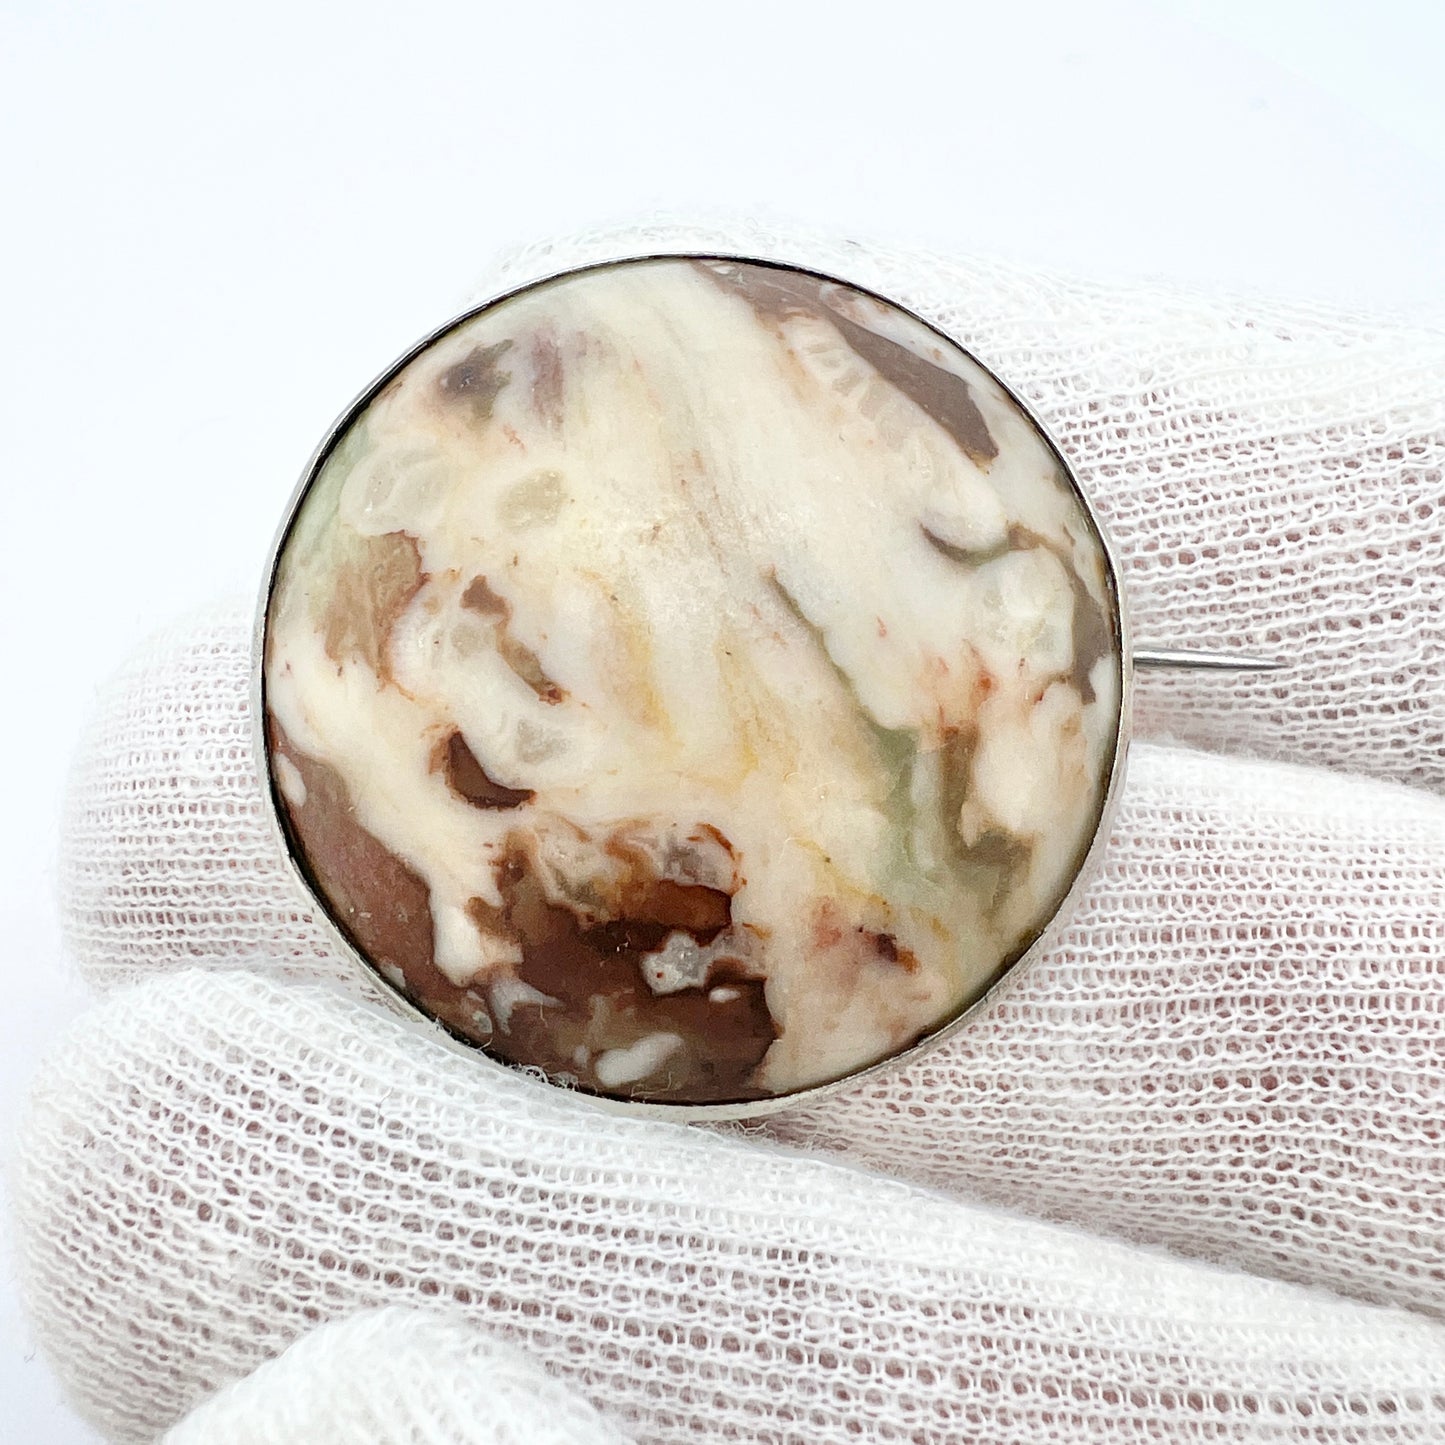 Sweden year 1855-78 Antique Solid Silver Marble Brooch.